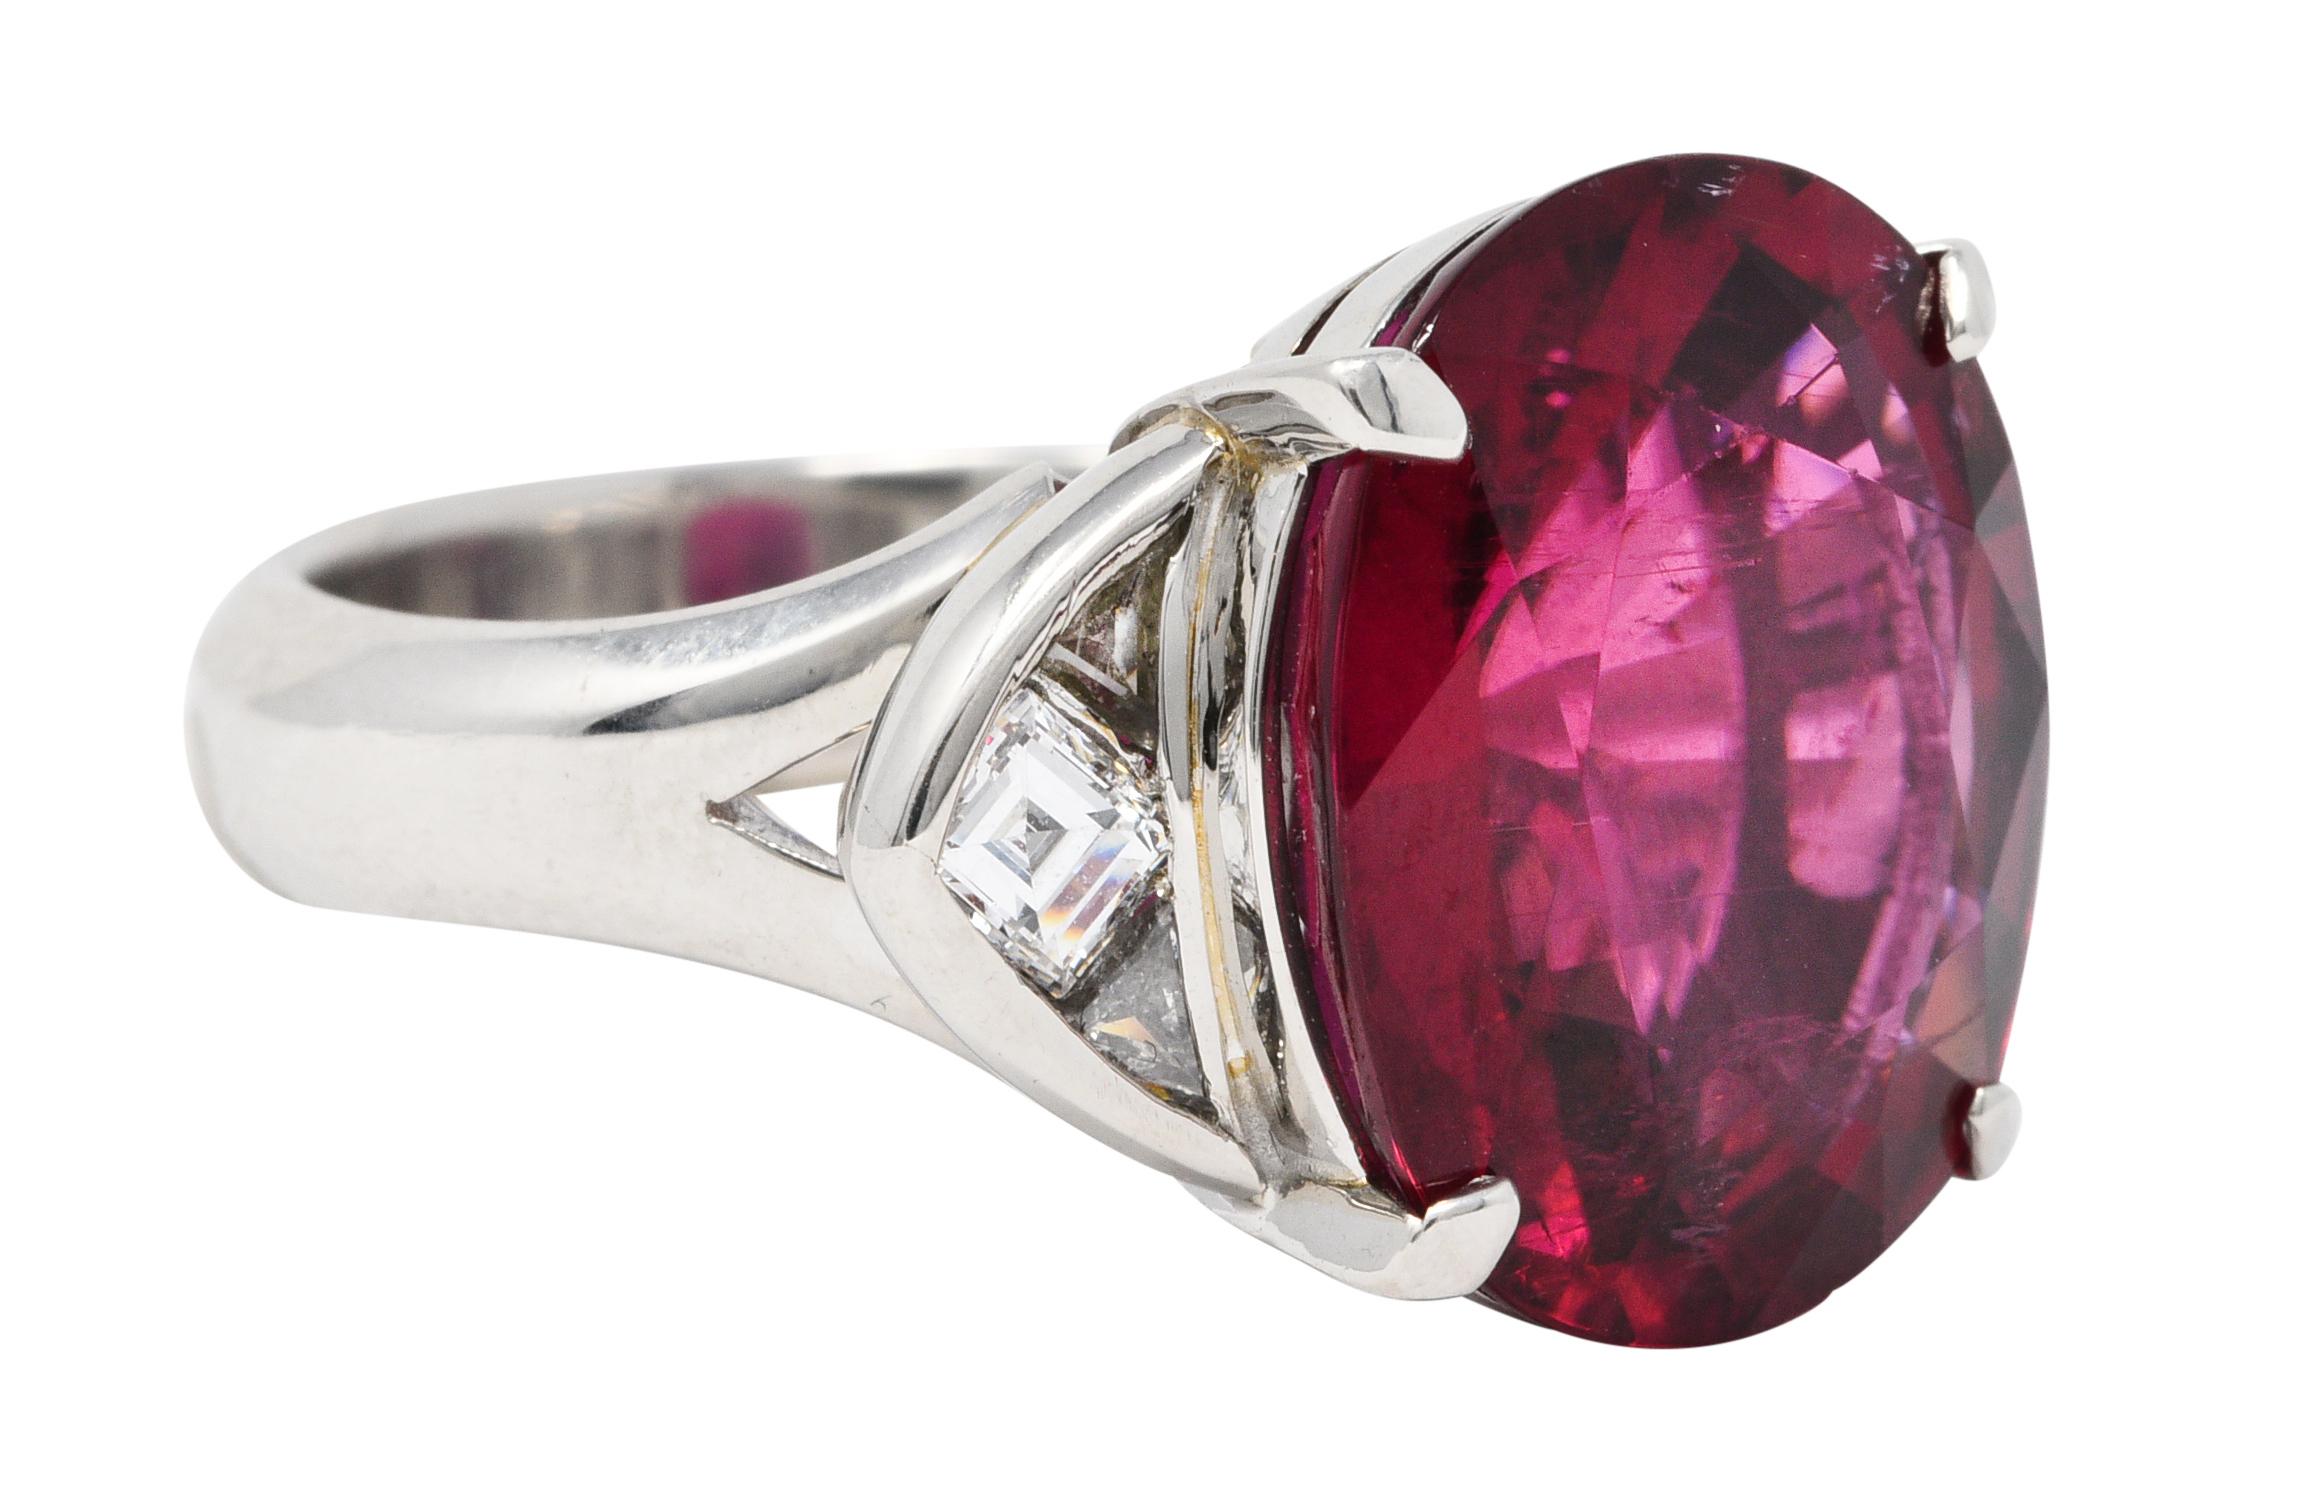 Substantial gemstone ring centers an oval cut rubellite tourmaline

Weighing 12.84 carats with strong and uniform raspberry red color

Basket set and flanked by stylized navette shoulders

Set with square step and triangular cut diamonds

Weighing